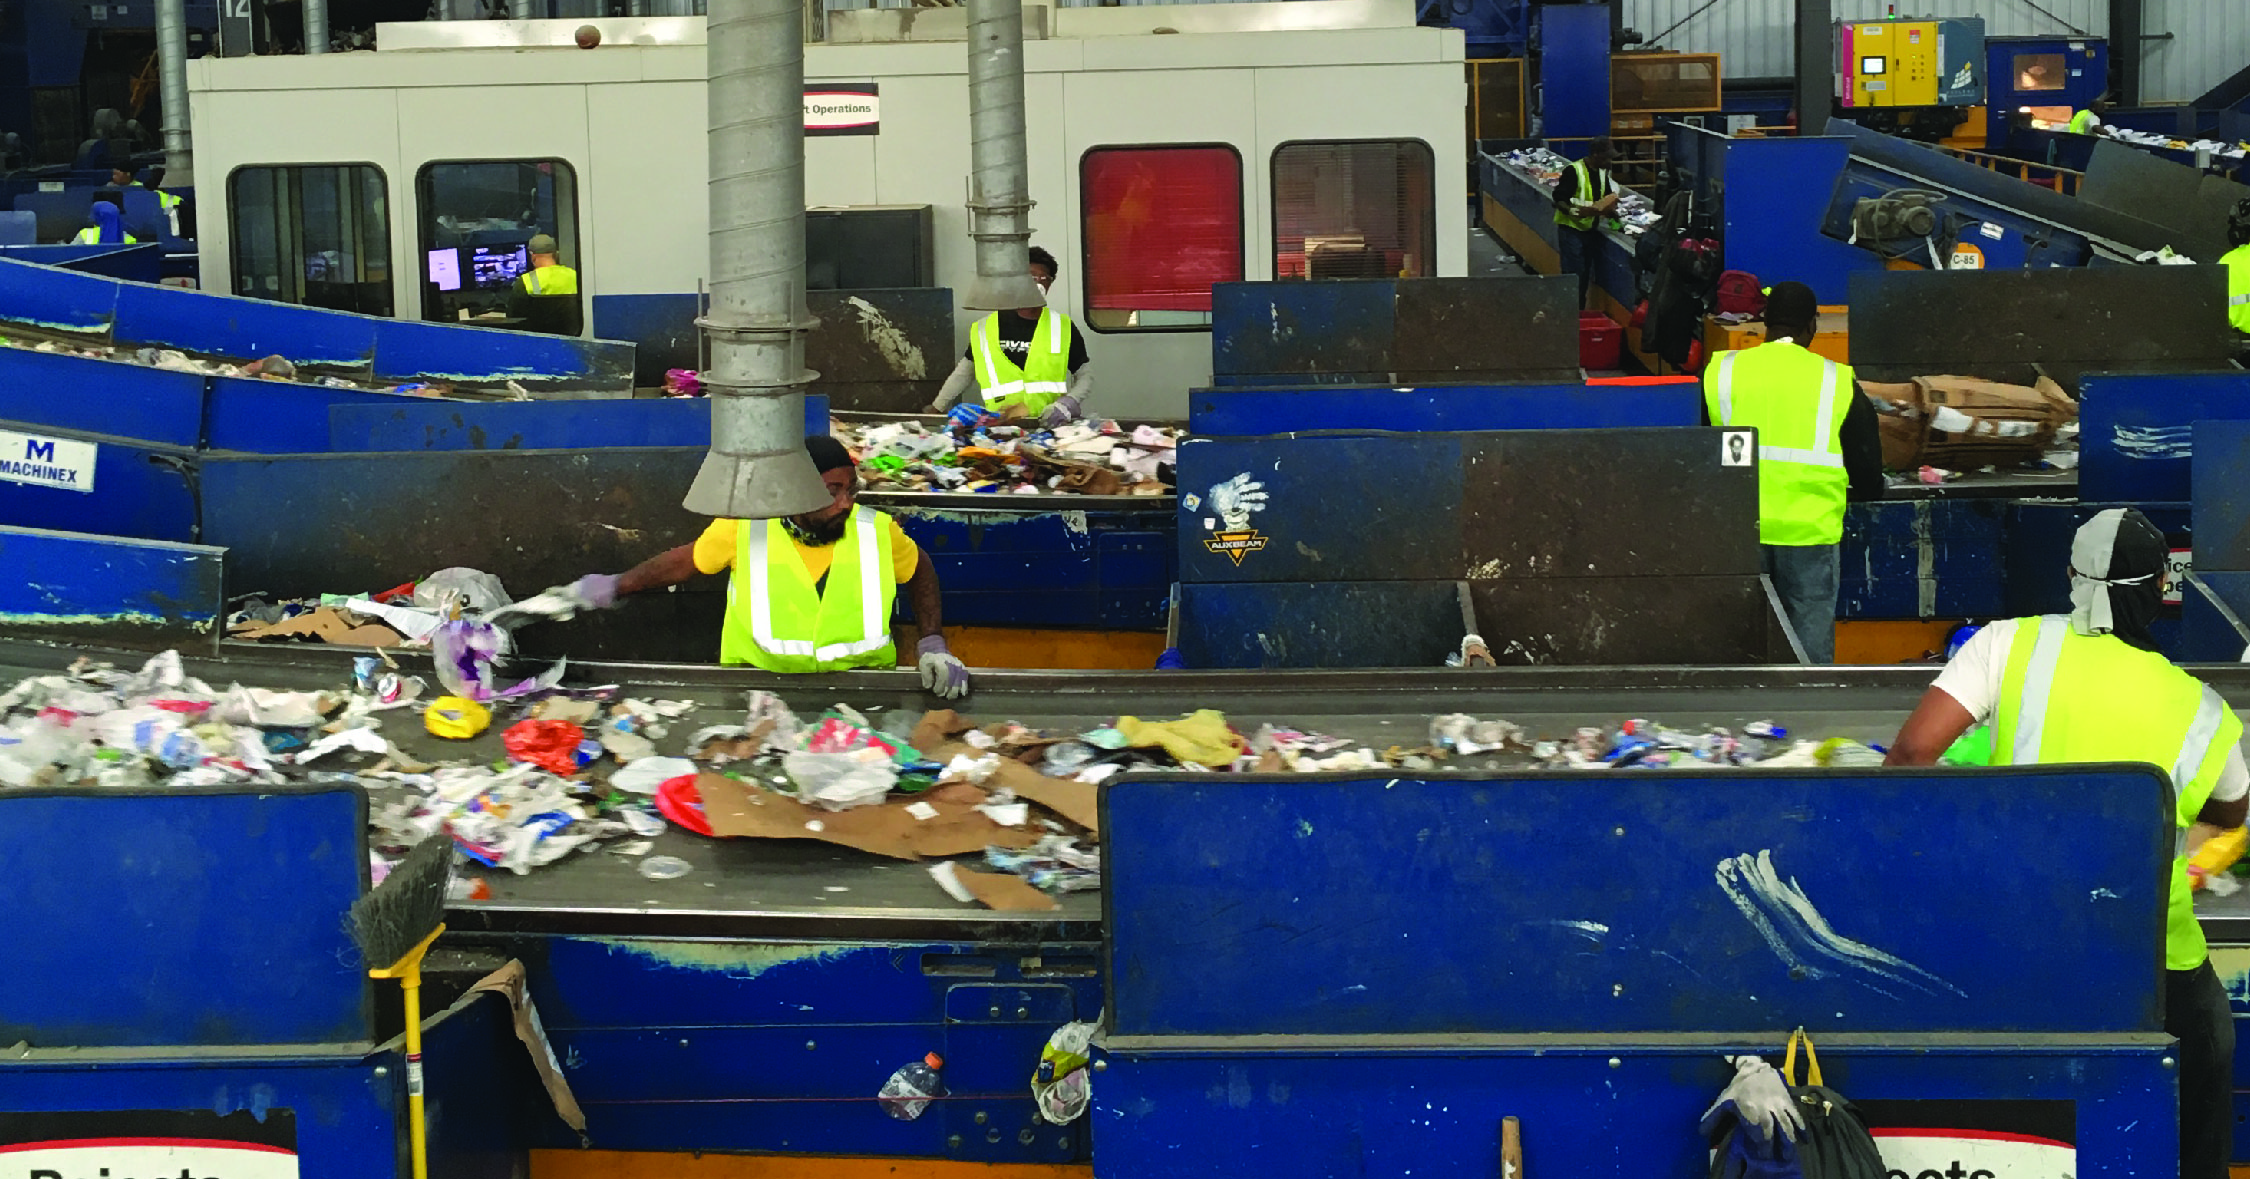 Packaging Professionals, Why Visiting a Recycling Facility Can Benefit You